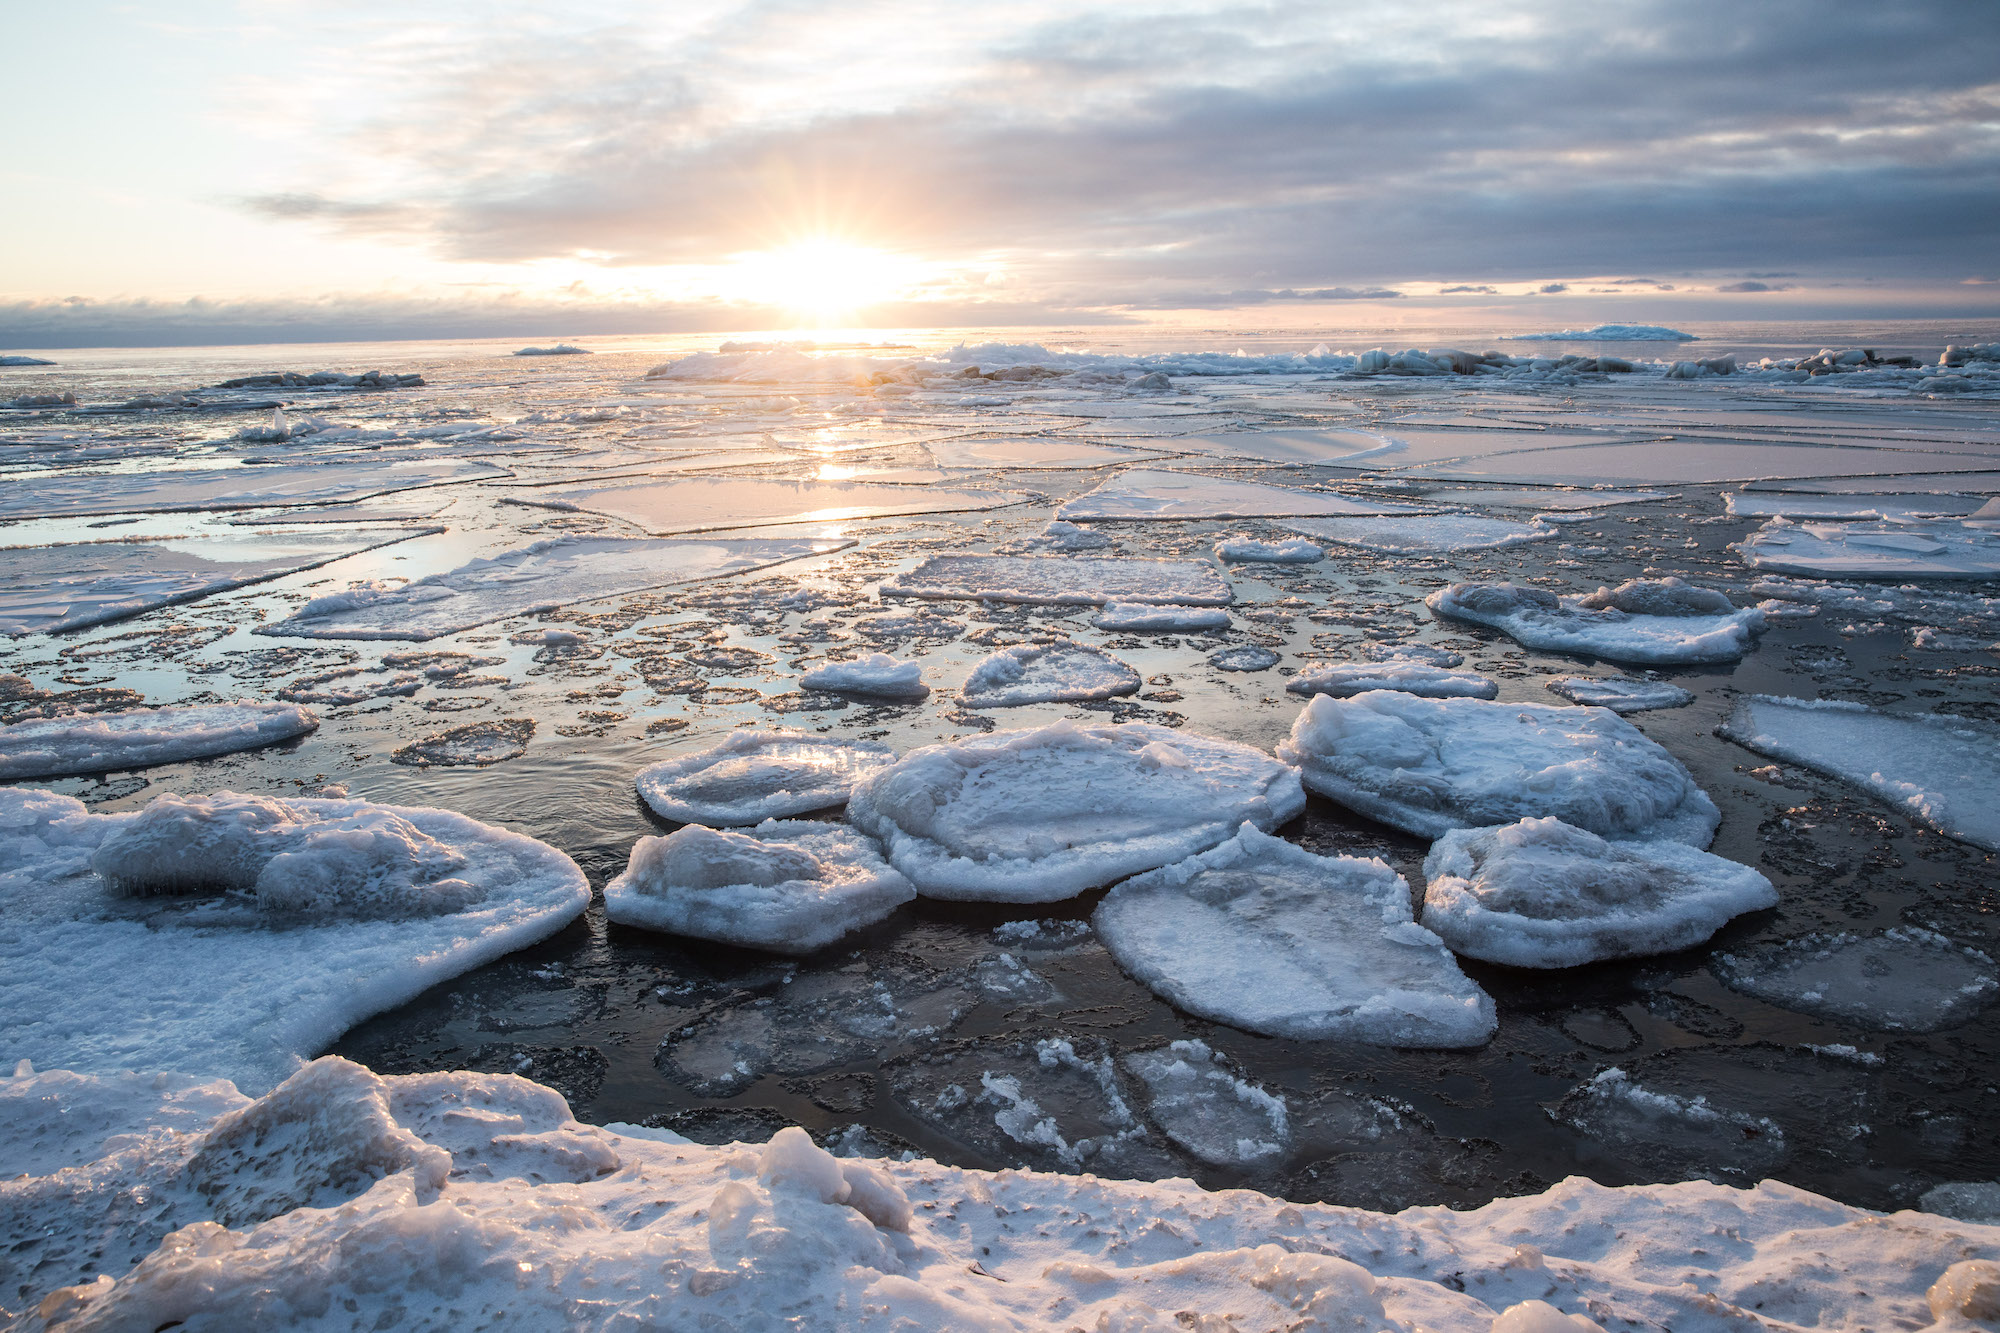 large chunks of ice floats bob on an icy body of water with a light yellow sun visible just above the water